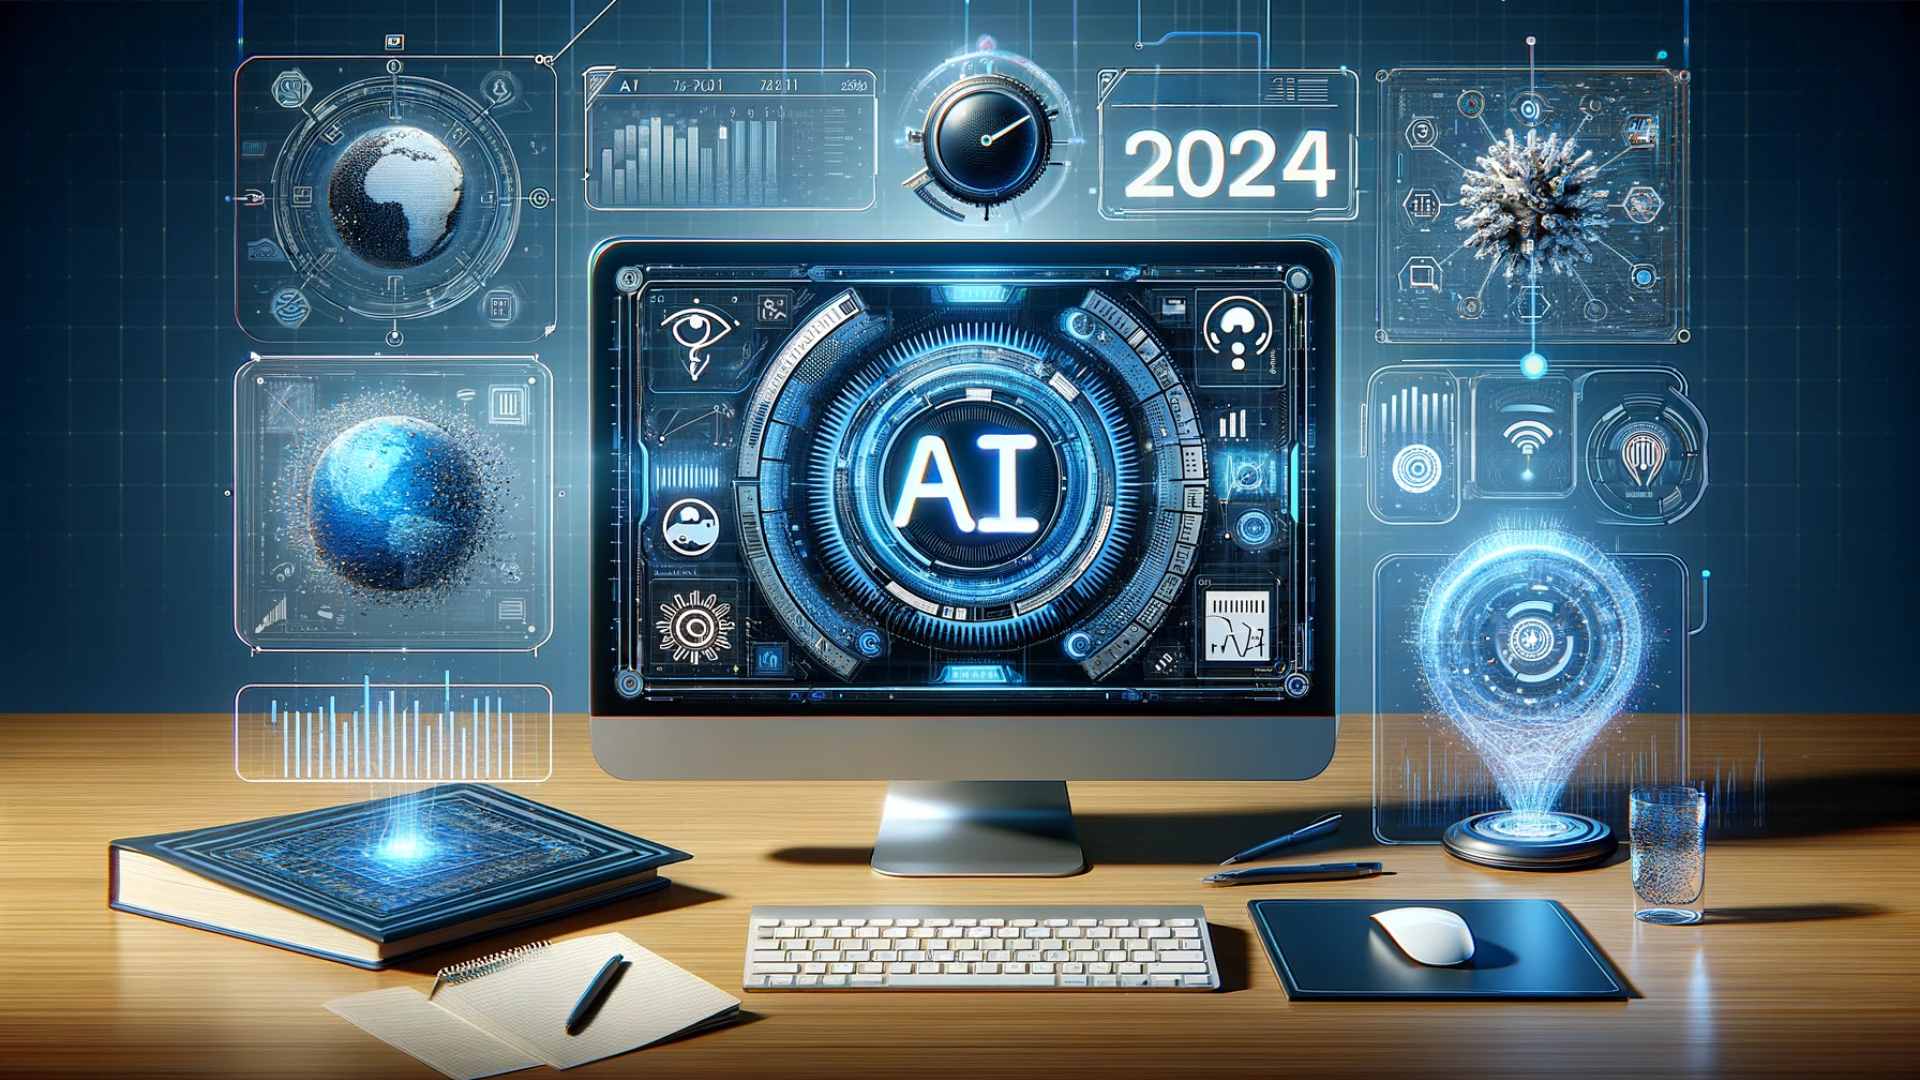 Futuristic workspace with a computer screen displaying AI writing tools, a clock showing the year 2024, and holographic interfaces.